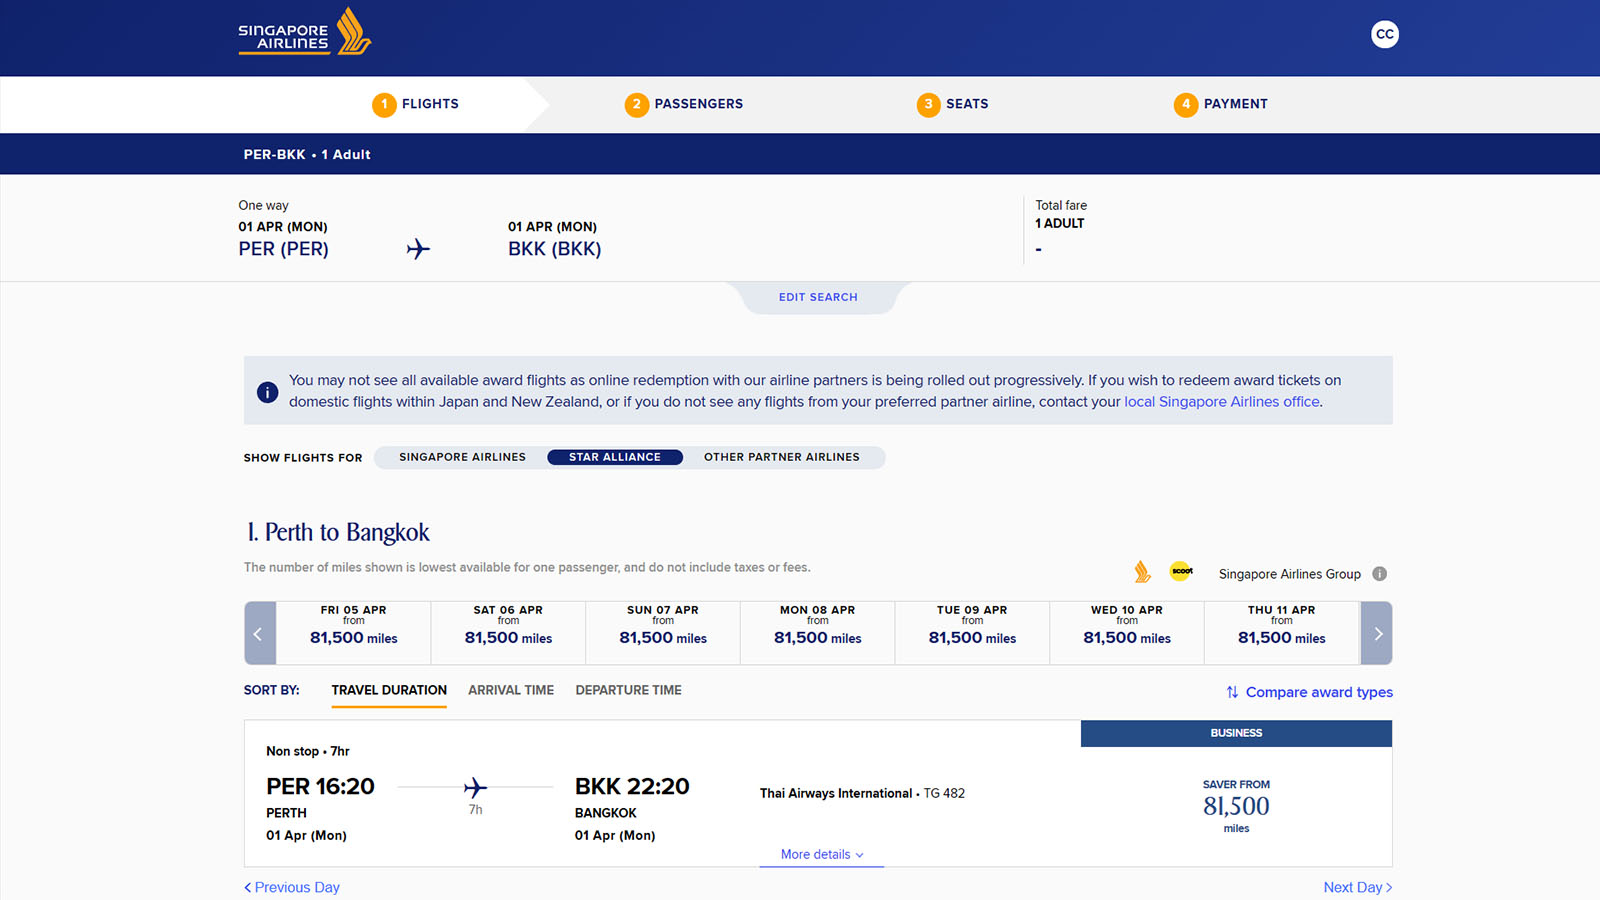 Use Singapore Airlines KrisFlyer miles to book Thai Airways' flights from Perth to Bangkok